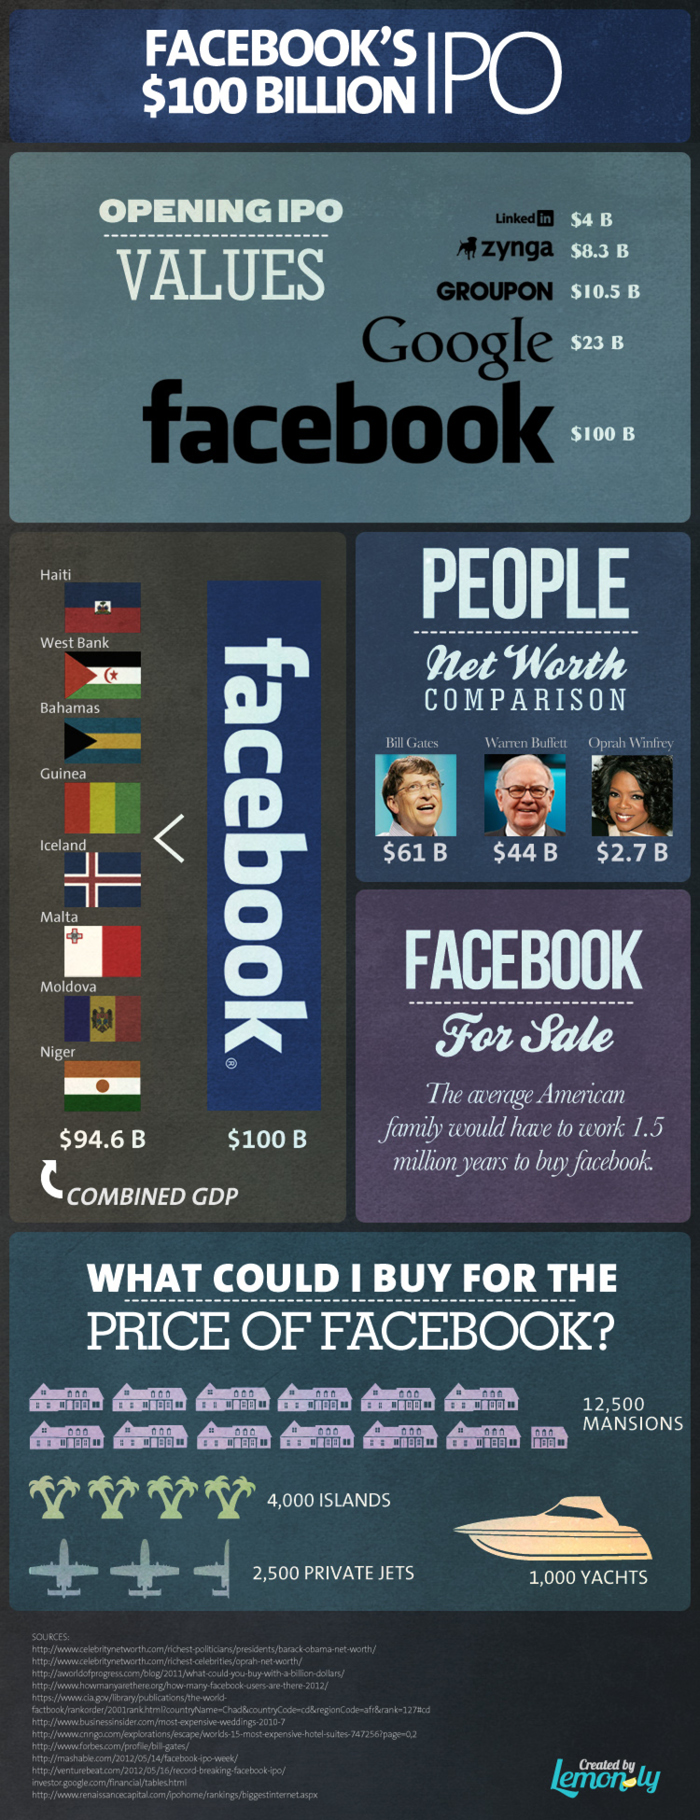 Facebook IPO: Putting $100 Billion Into Perspective